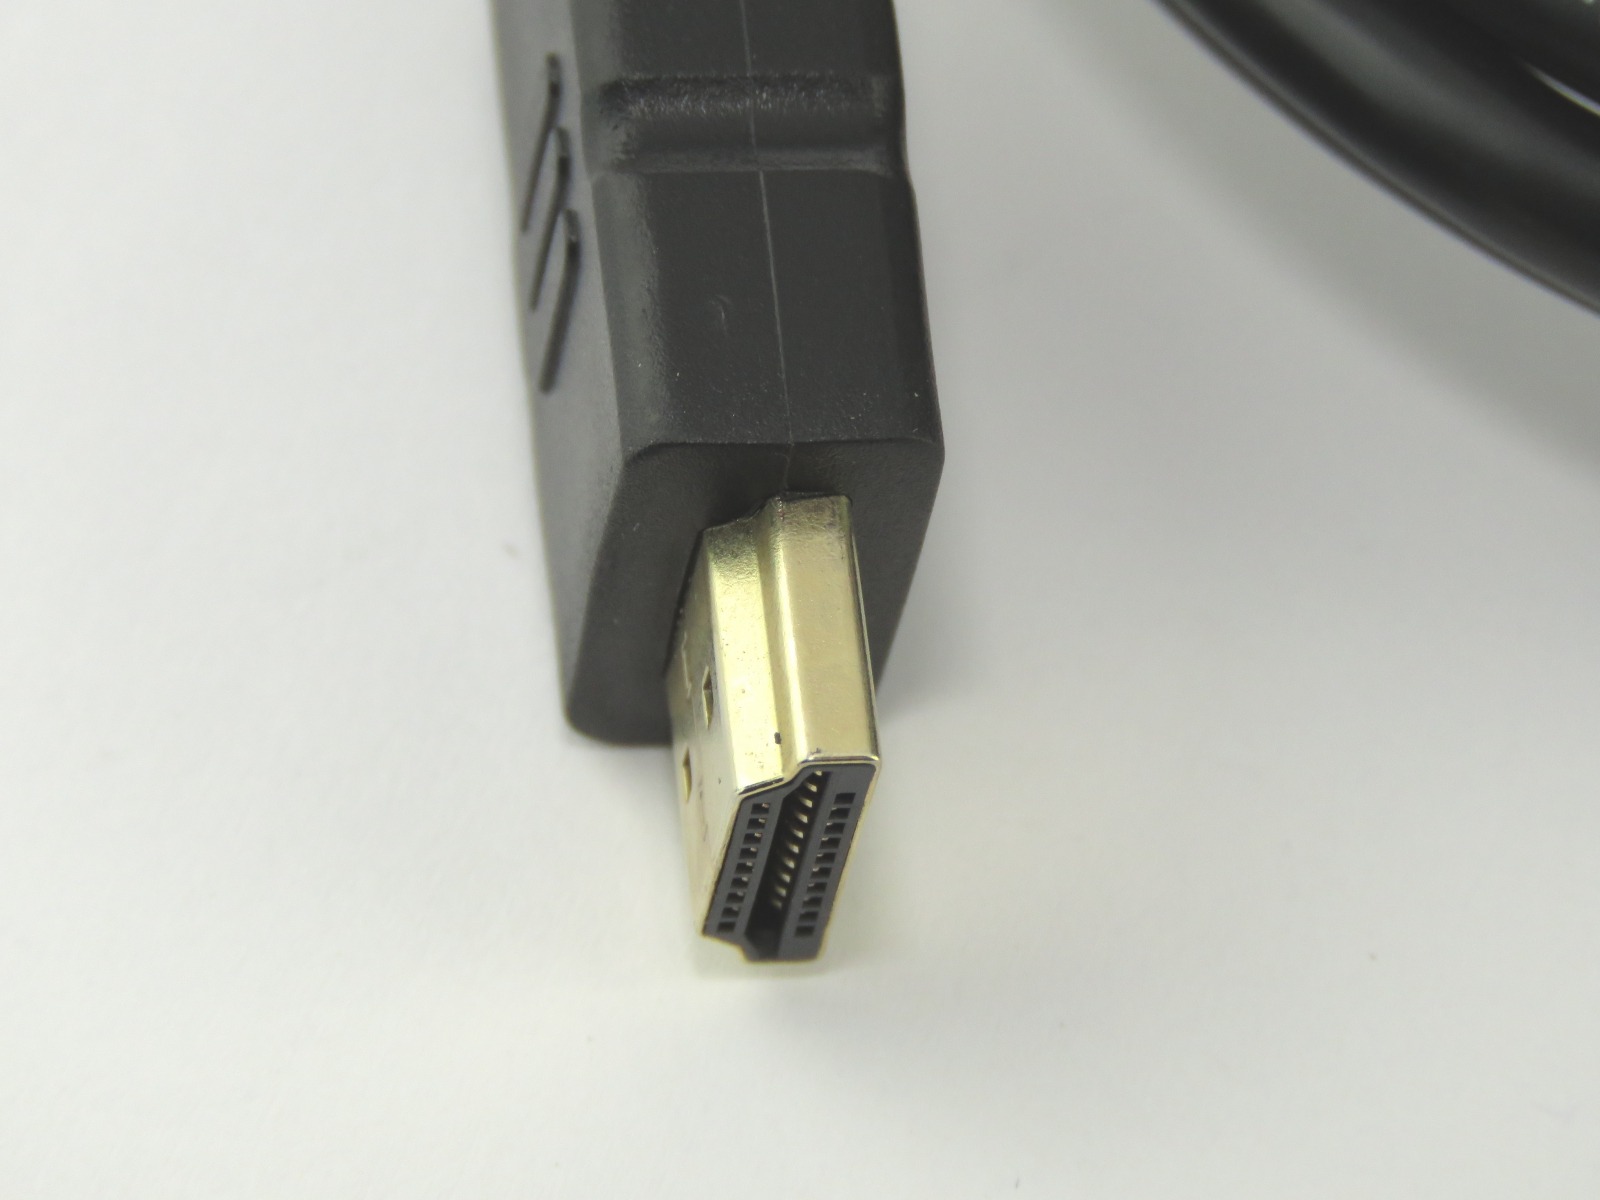  CABLE-550-1-5GE (image 2/2)